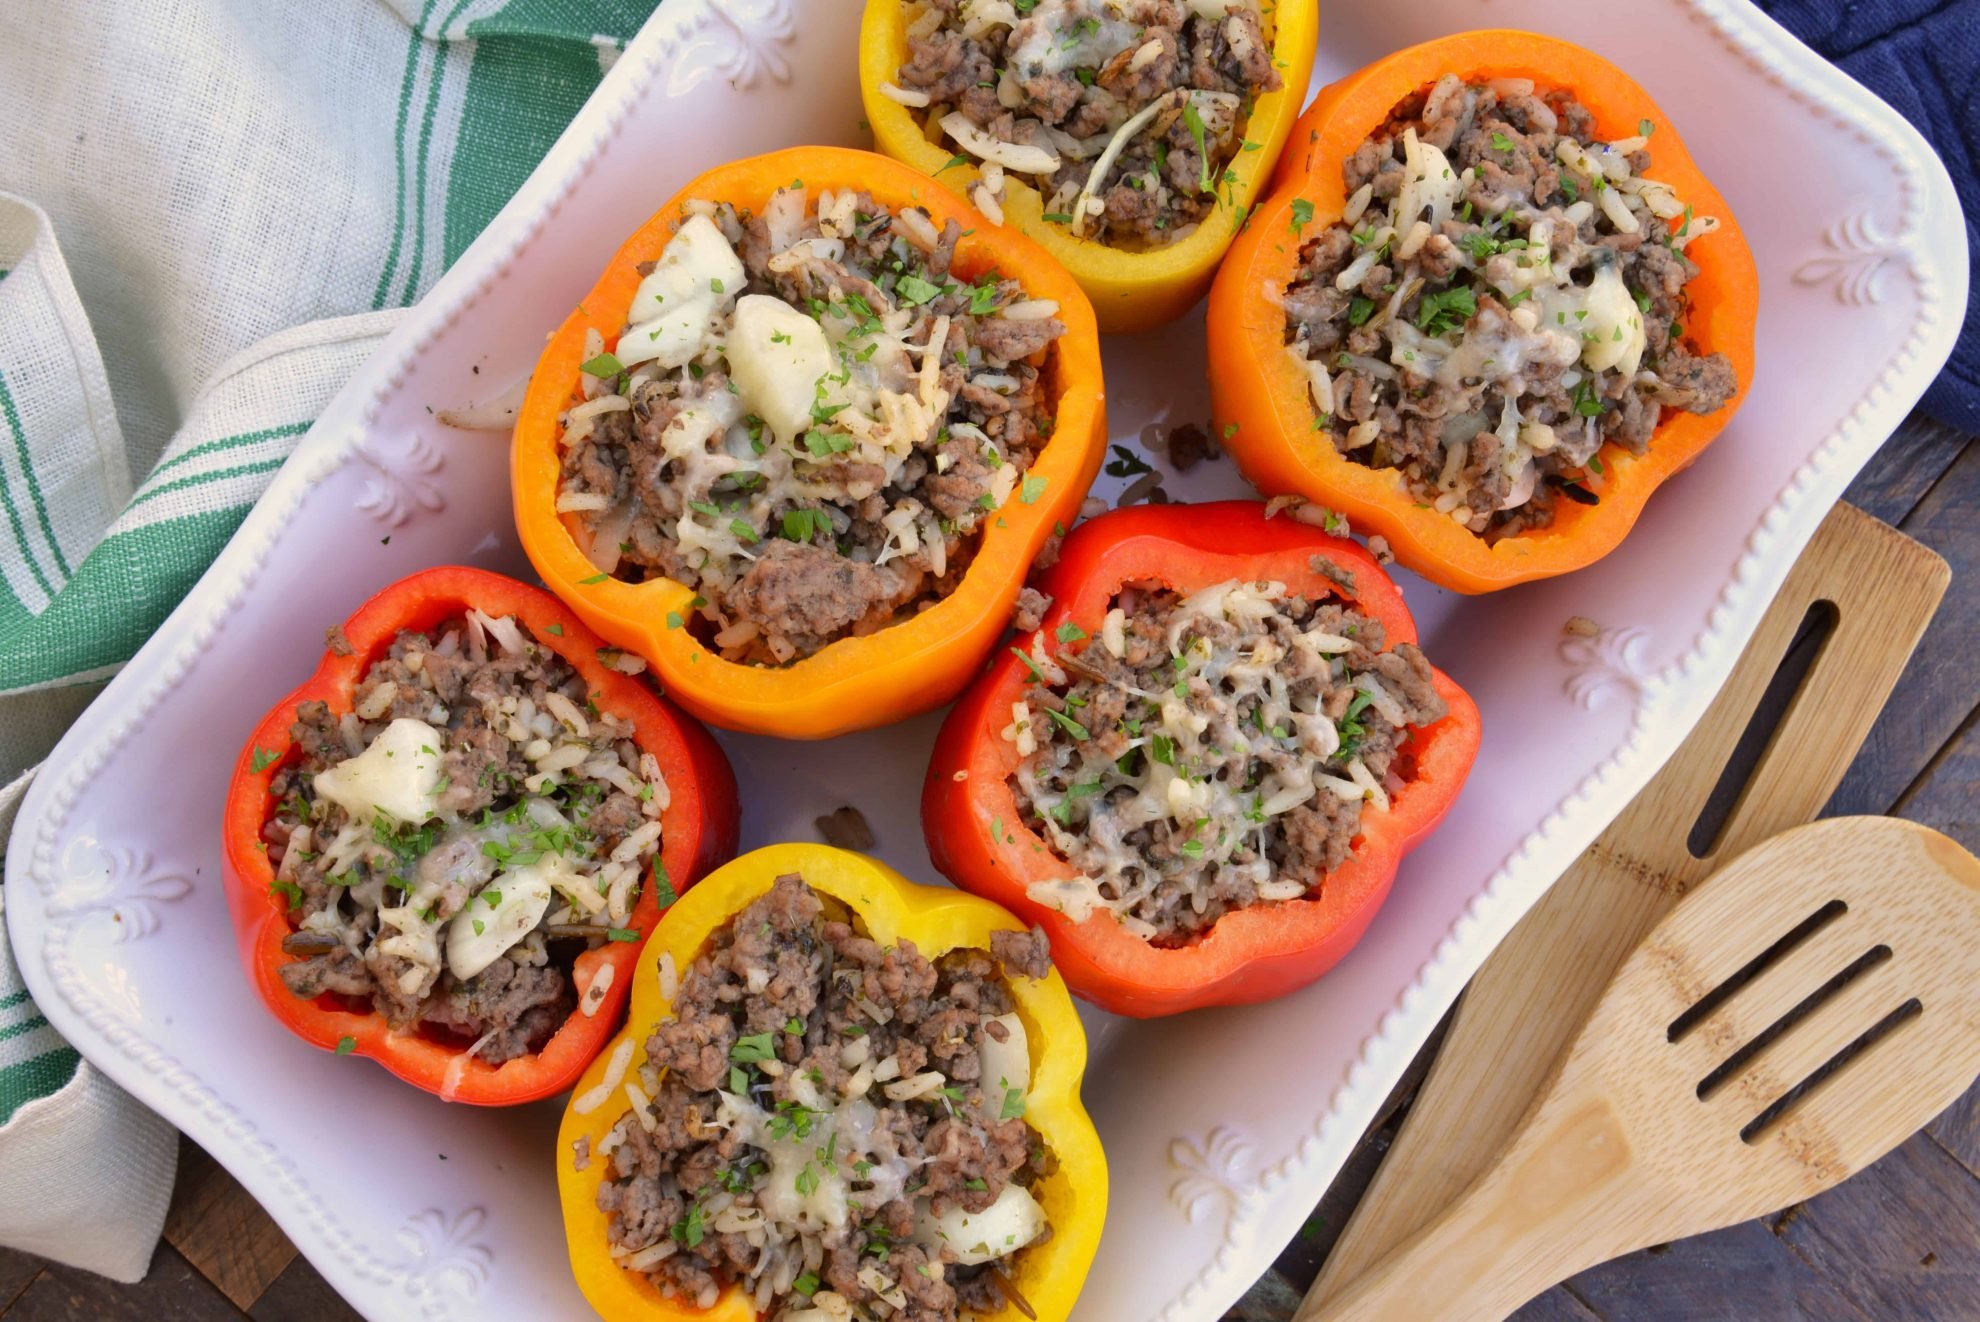 Classic Stuffed Peppers are bell peppers stuffed with ground beef, rice, cheese and spices. A timeless meal ready in 30 minutes and easily made ahead. #stuffedpeppers #stuffedbellpeppers www.savoryexperiments.com